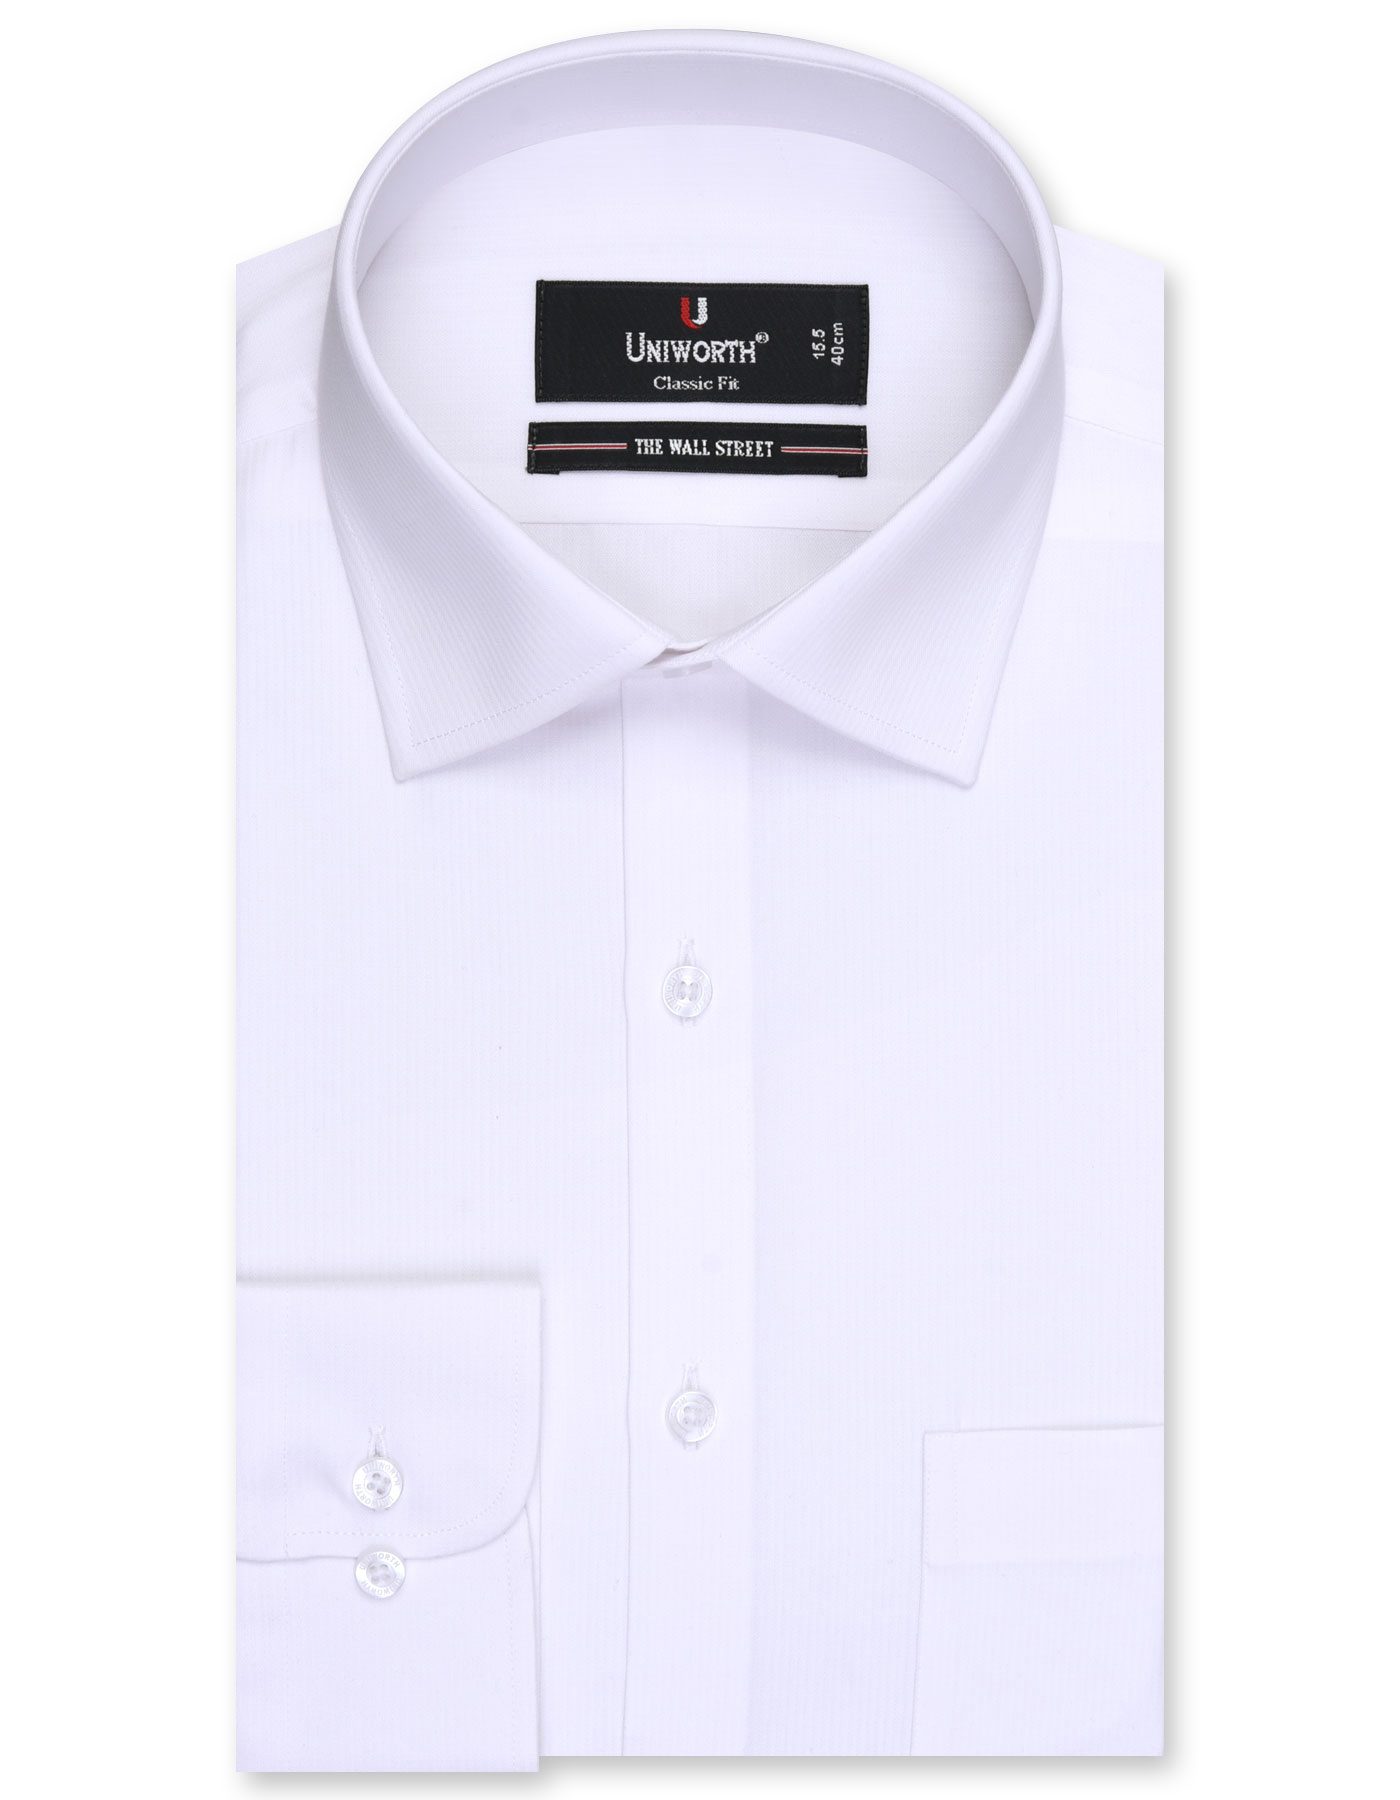 Plain Shirts For Mens Online Shopping in Pakistan at Uniworth Shop